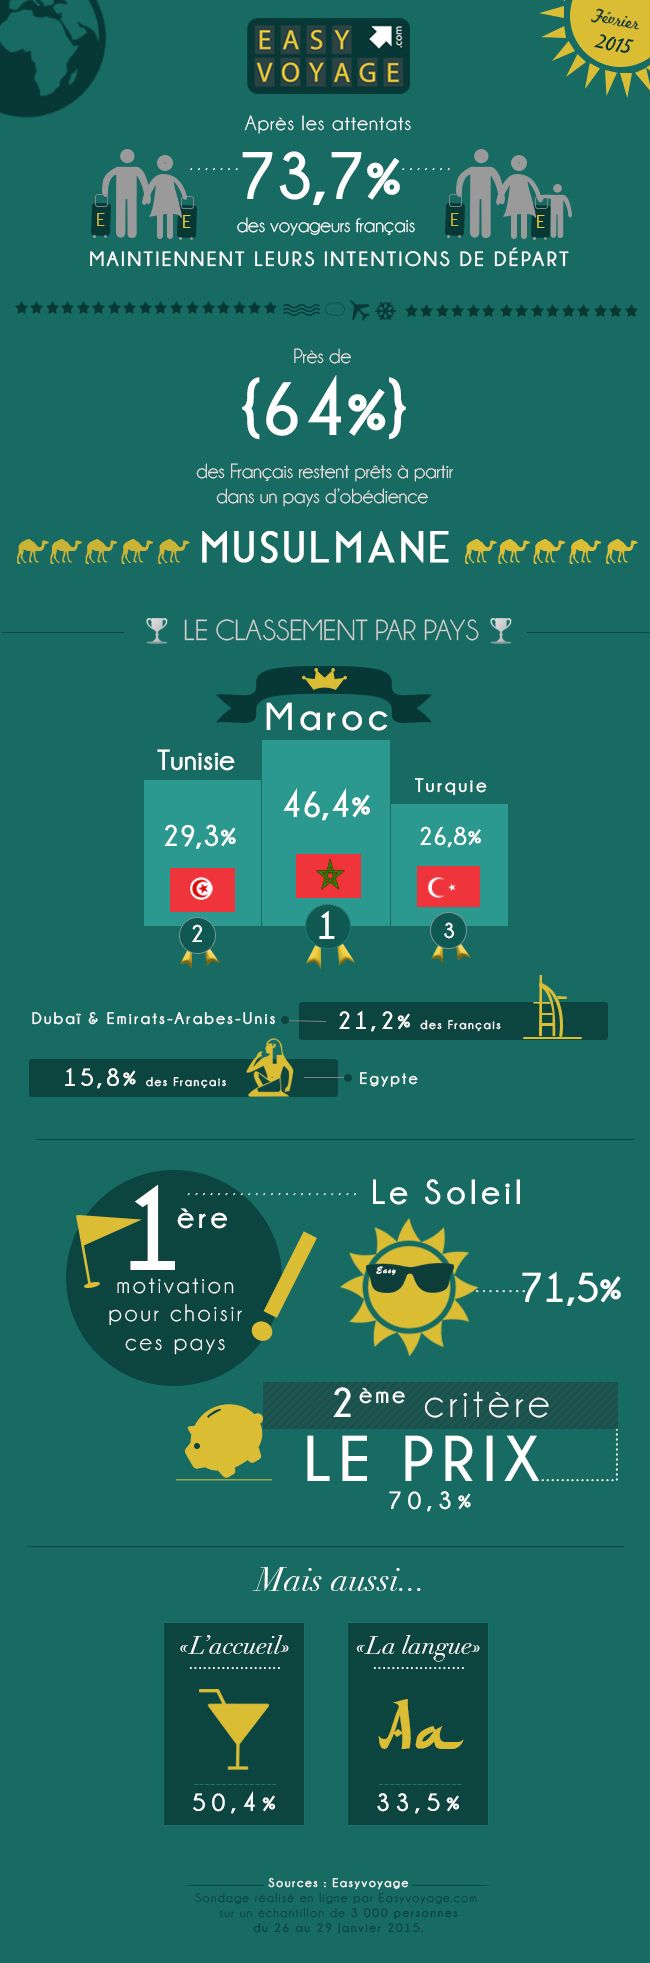 Infographie EasyVoyage